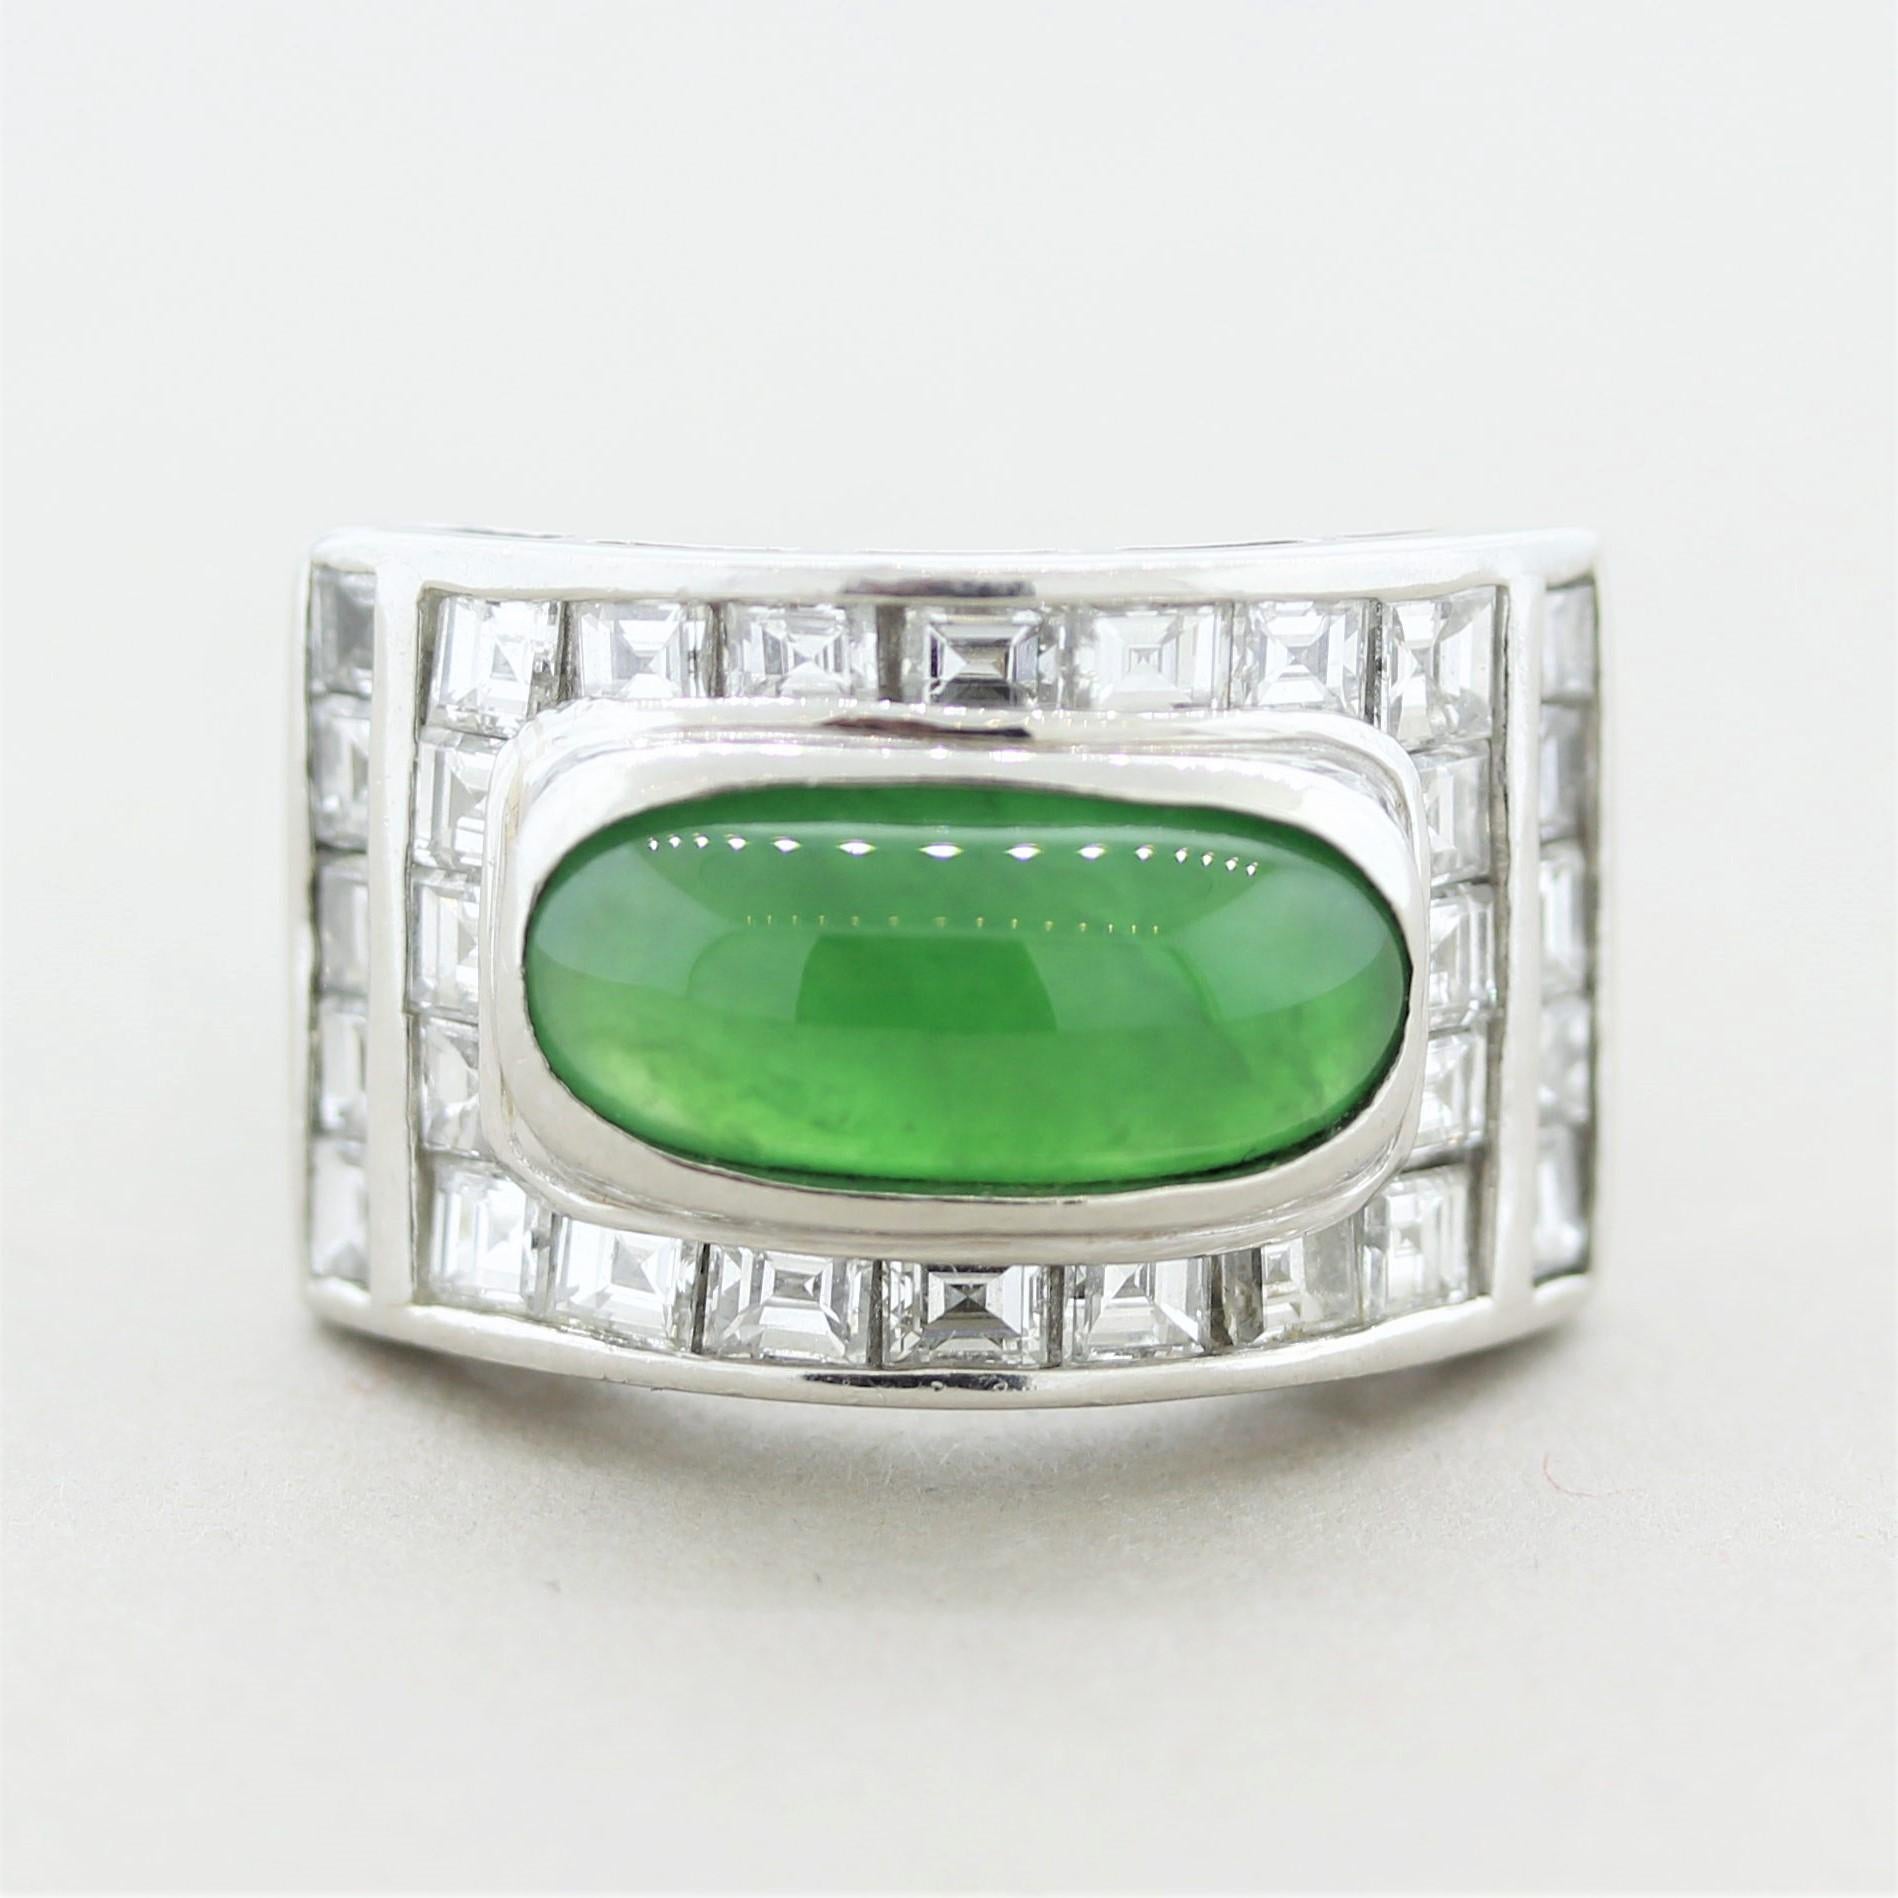 A large, fine, and impressive ring featuring a natural jadeite jade weighing 4.89 carats. The jade is certified by the GIA as natural color with no treatment, “Type A.” It is complemented by 2.94 carats of fine bright white asscher-cut diamonds